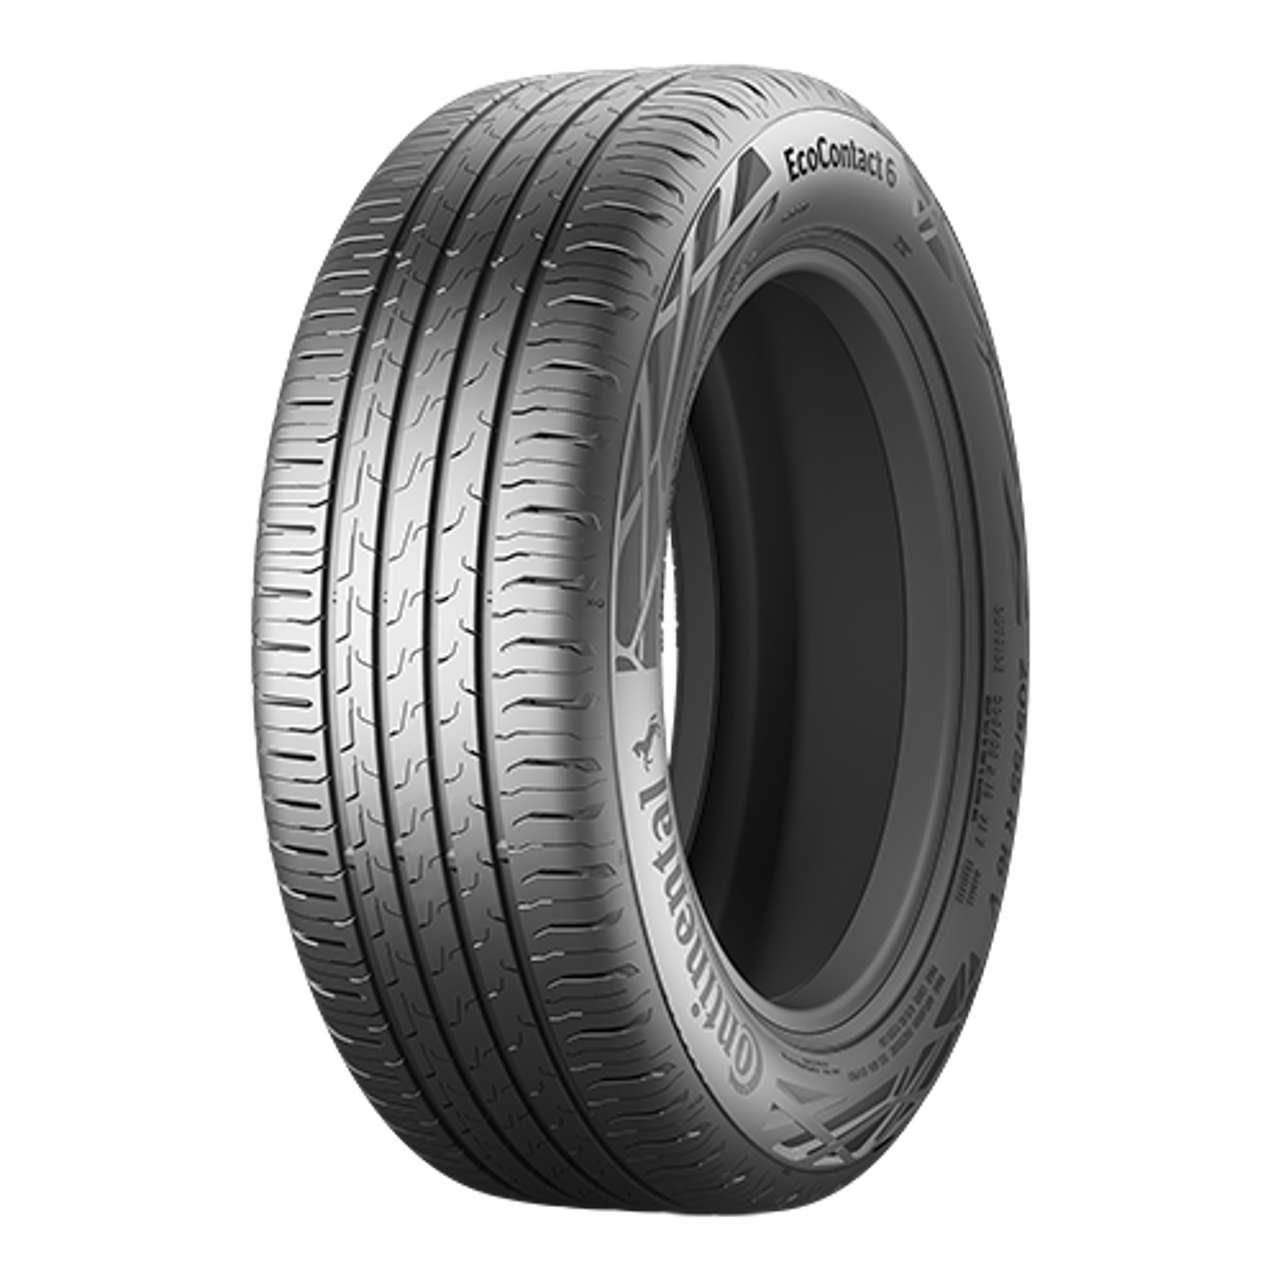 CONTINENTAL ECOCONTACT 6 (EVc) 155/70R13 75T